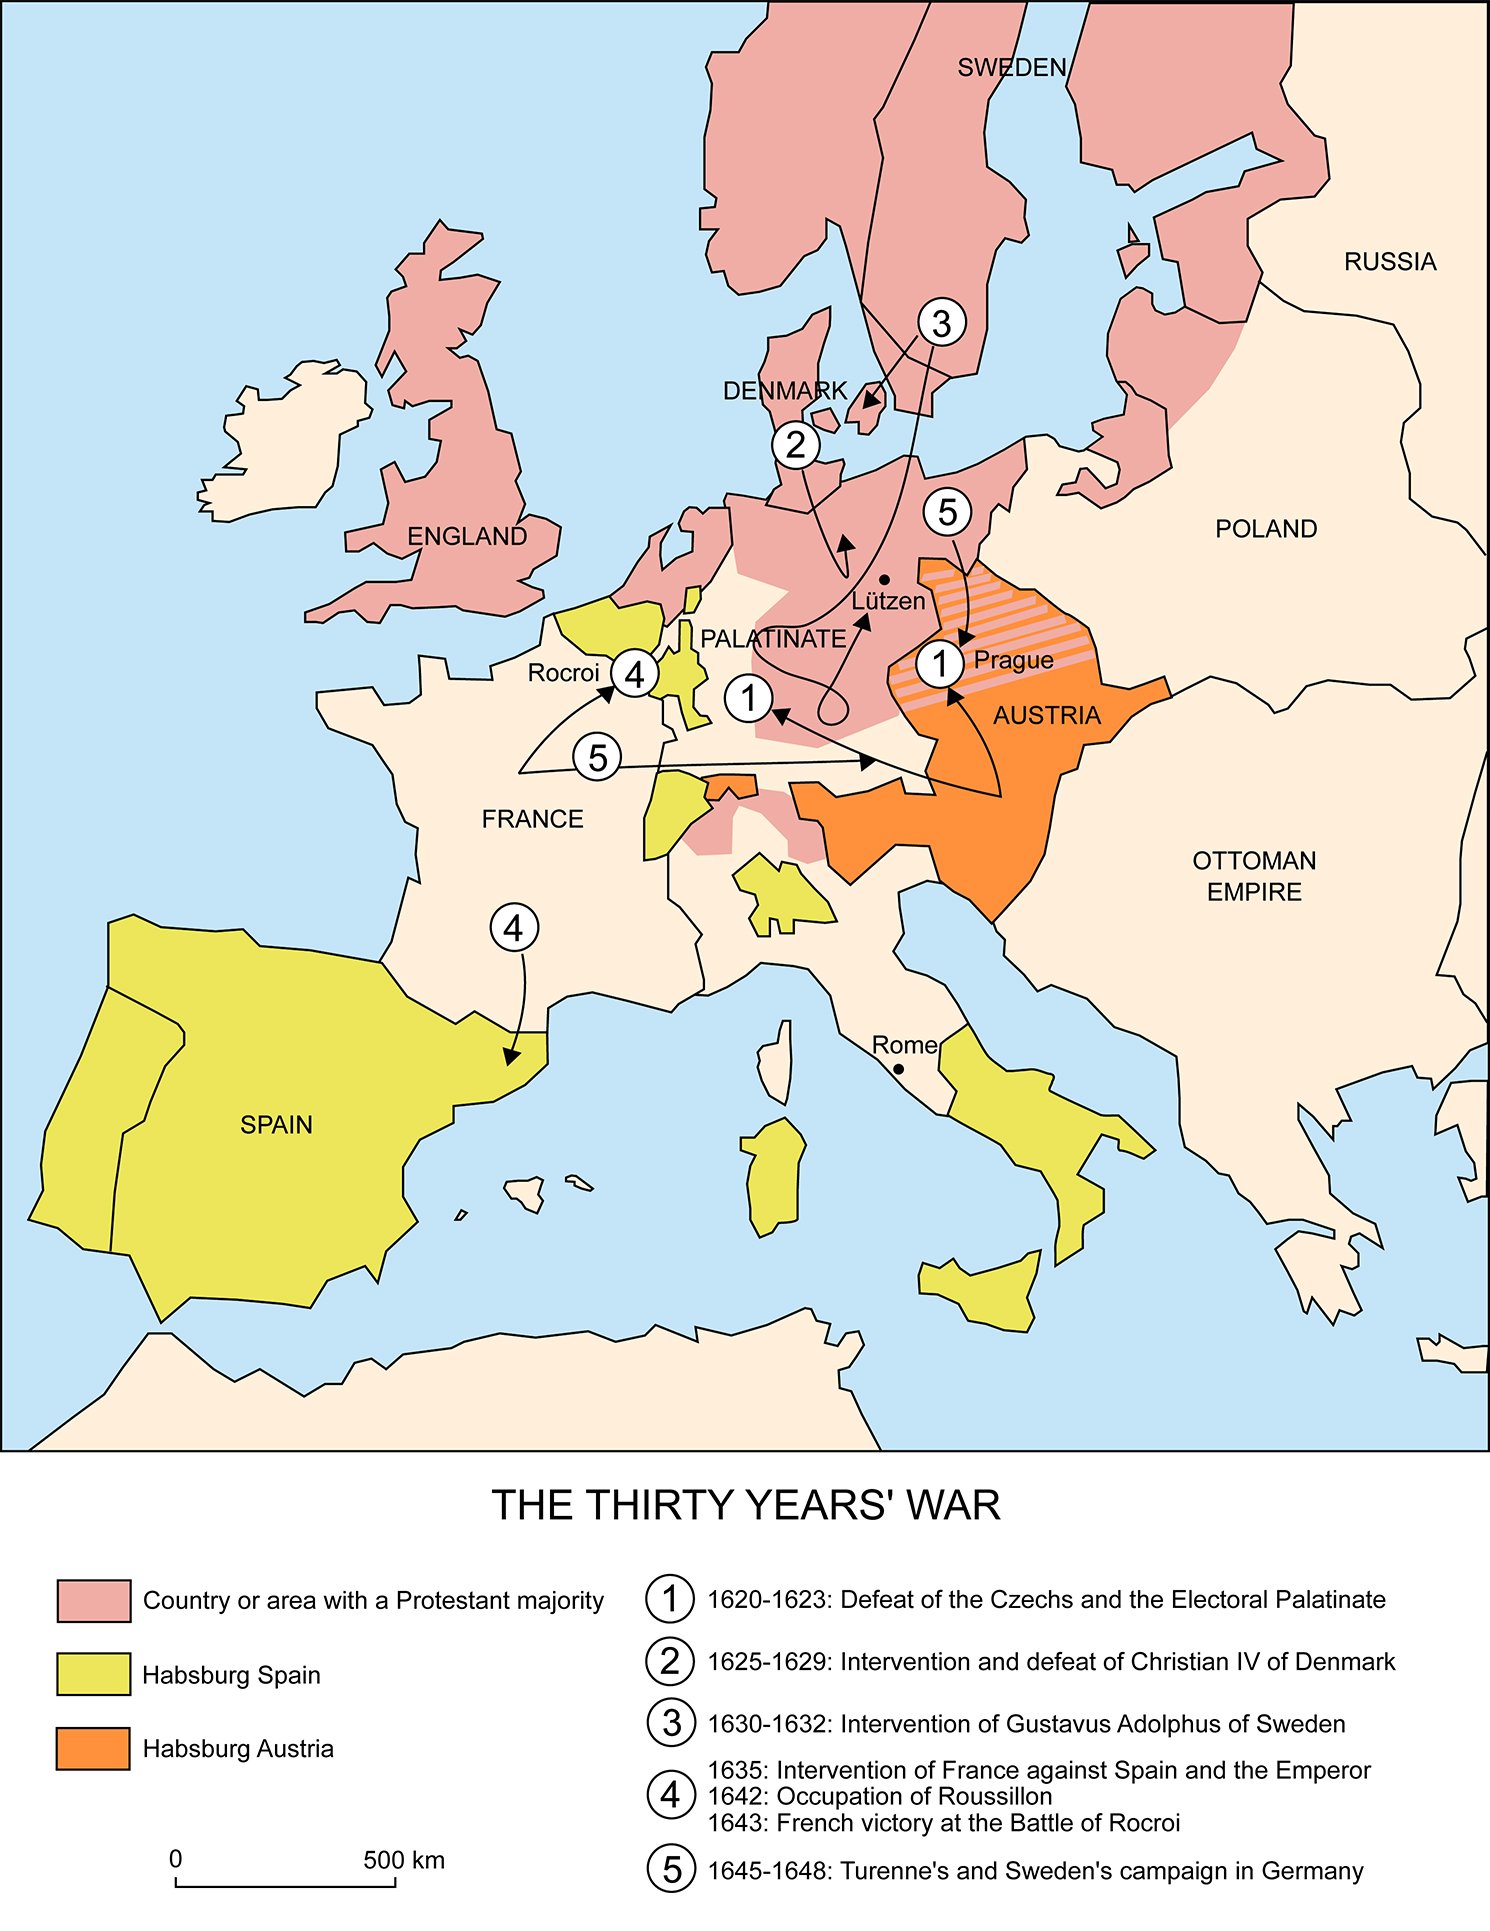 A map of Europe during the Thirty Years’ War, showing the different countries and their allegiances. The map is color-coded and labeled with numbers that correspond to a key at the bottom. The map also shows the locations and dates of major battles and interventions that occurred during the war. The title of the map is “THE THIRTY YEARS’ WAR” and the map has a scale of 500 km.